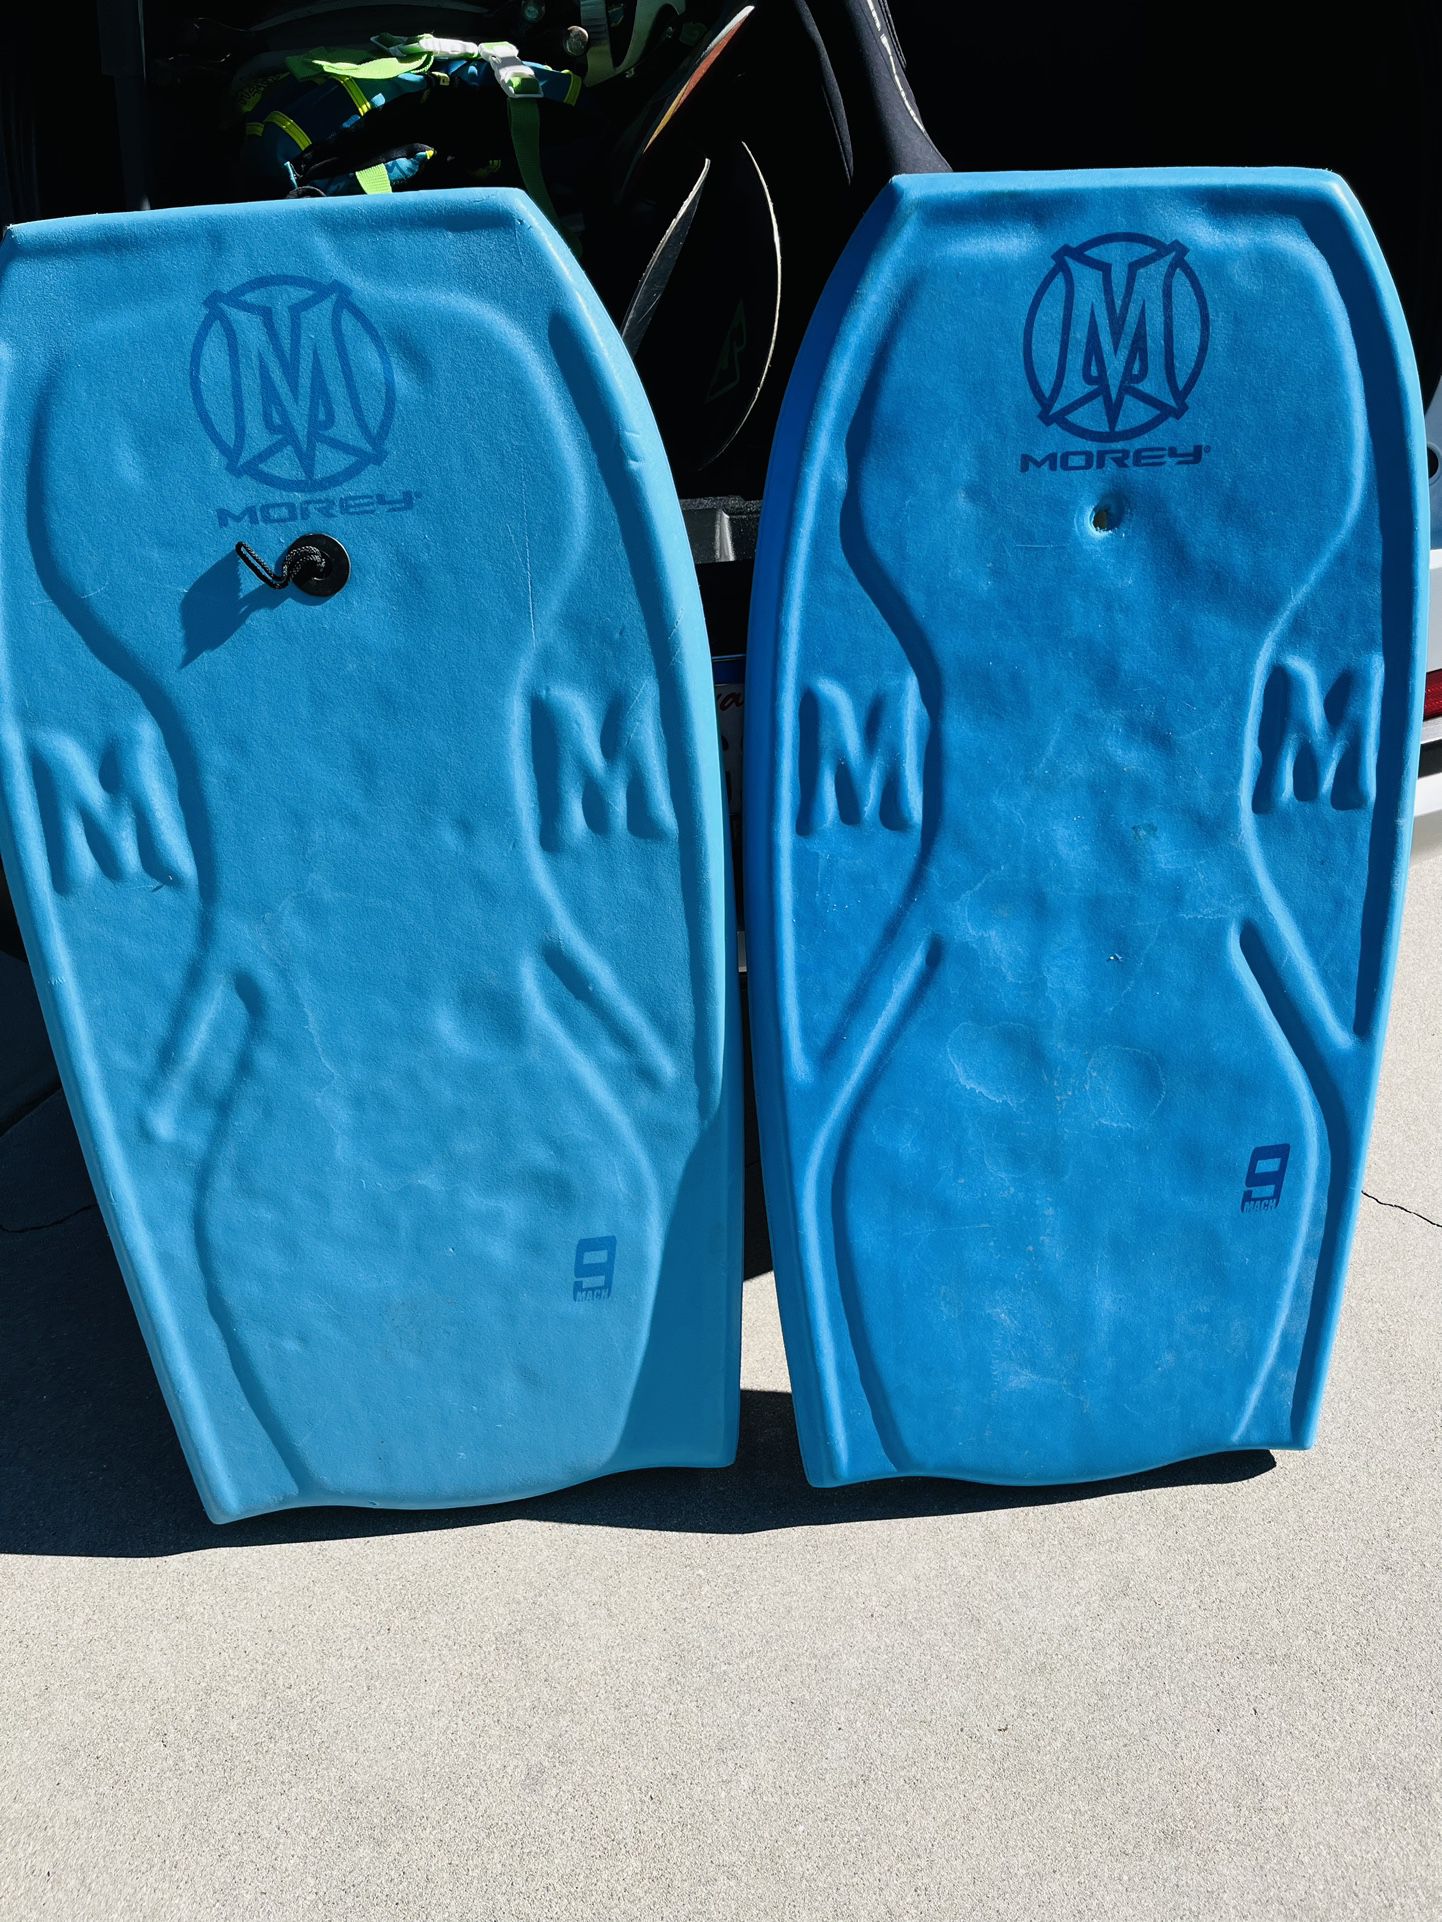 2 Boogie Boards Selling As A Set Of 2 